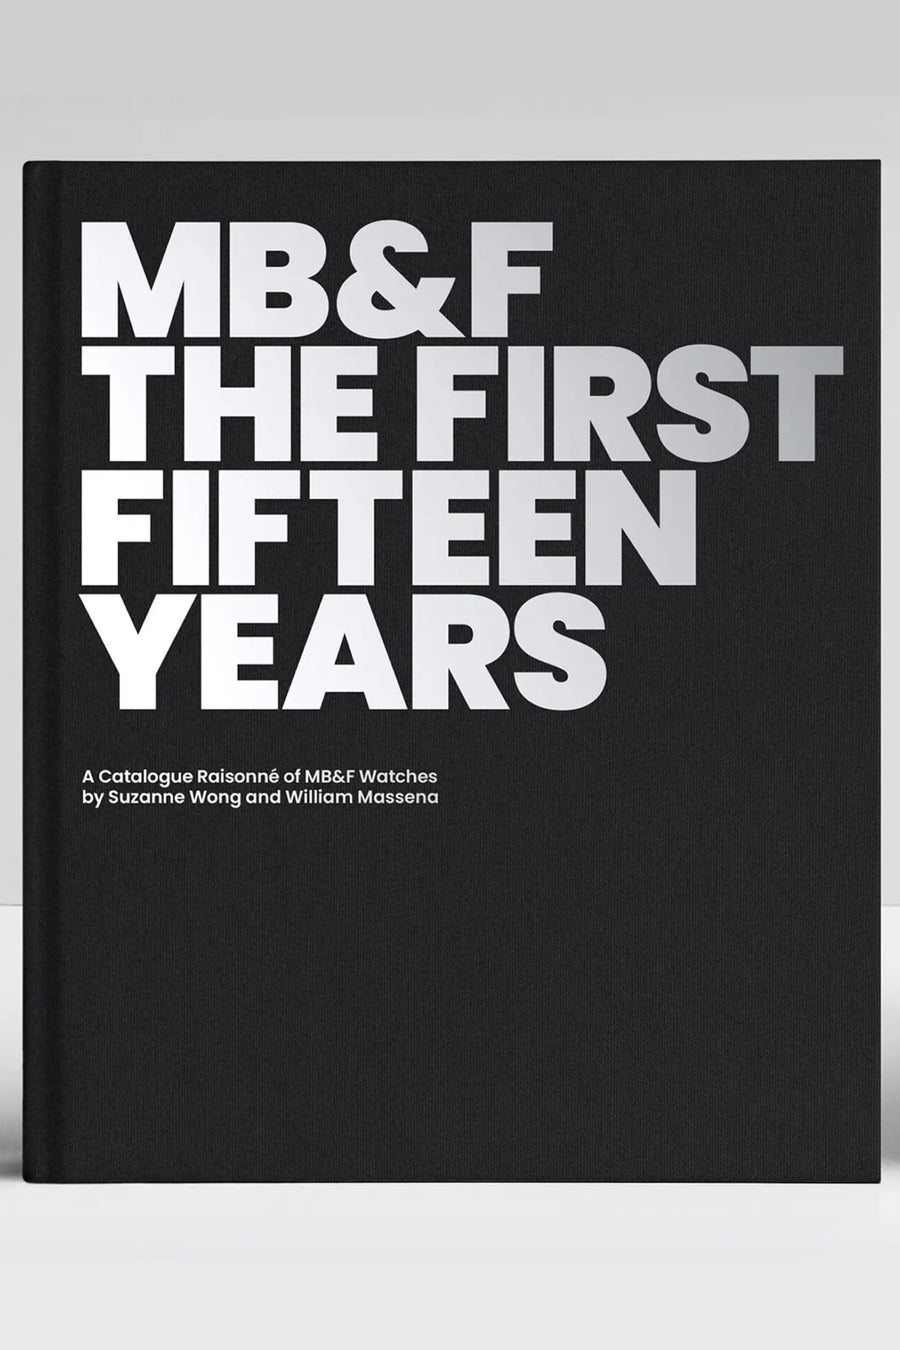 MB&F: The First Fifteen Years